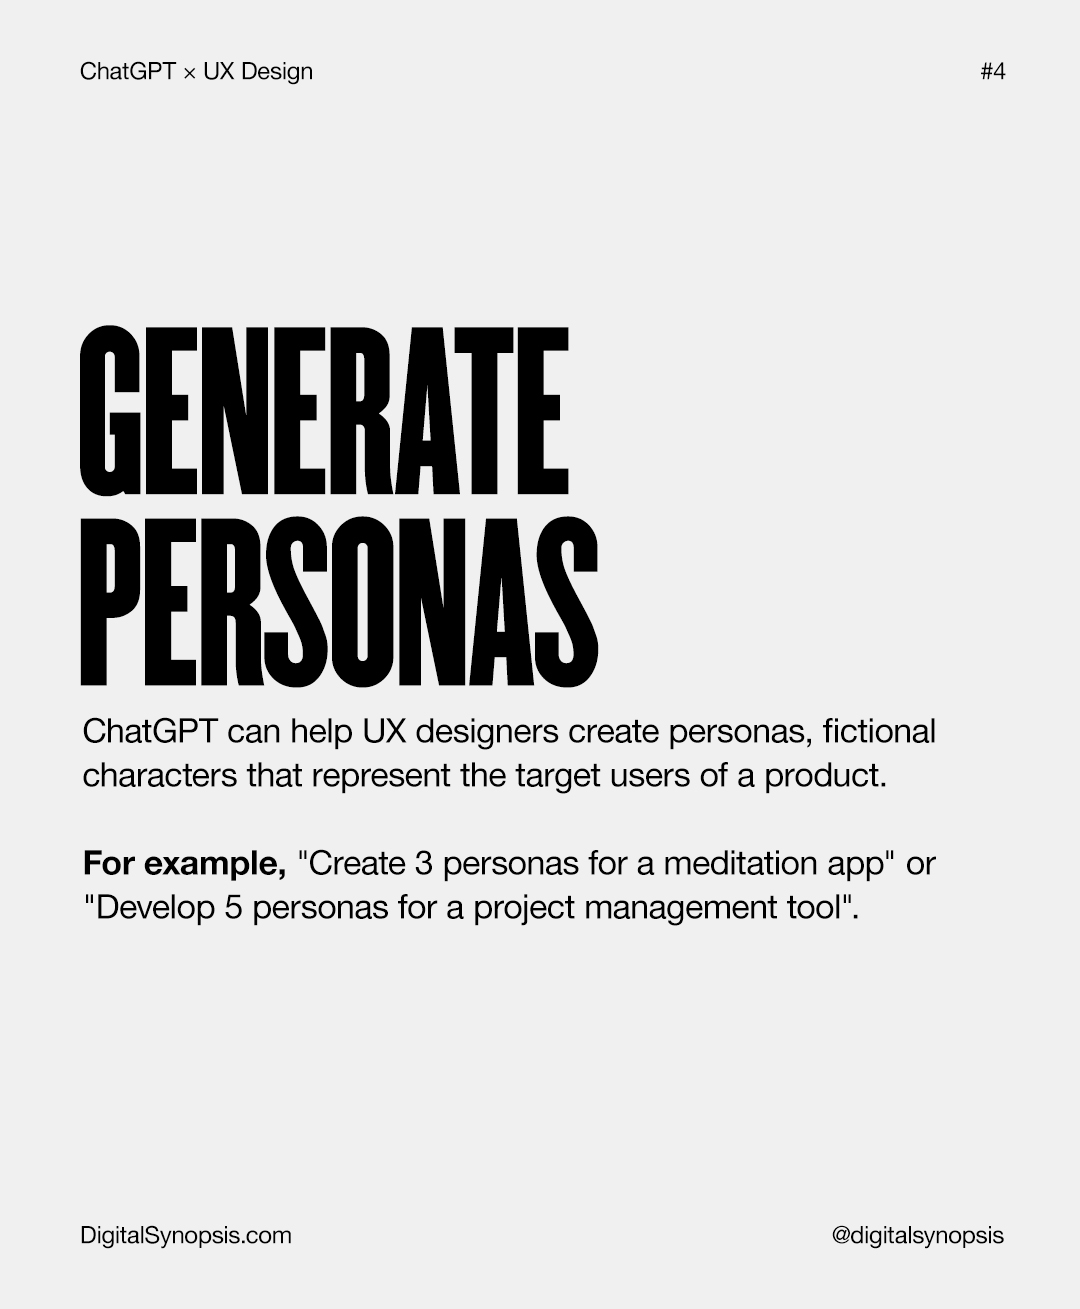 Top 10 Ways To Use ChatGPT For UX Design - Generate Personas